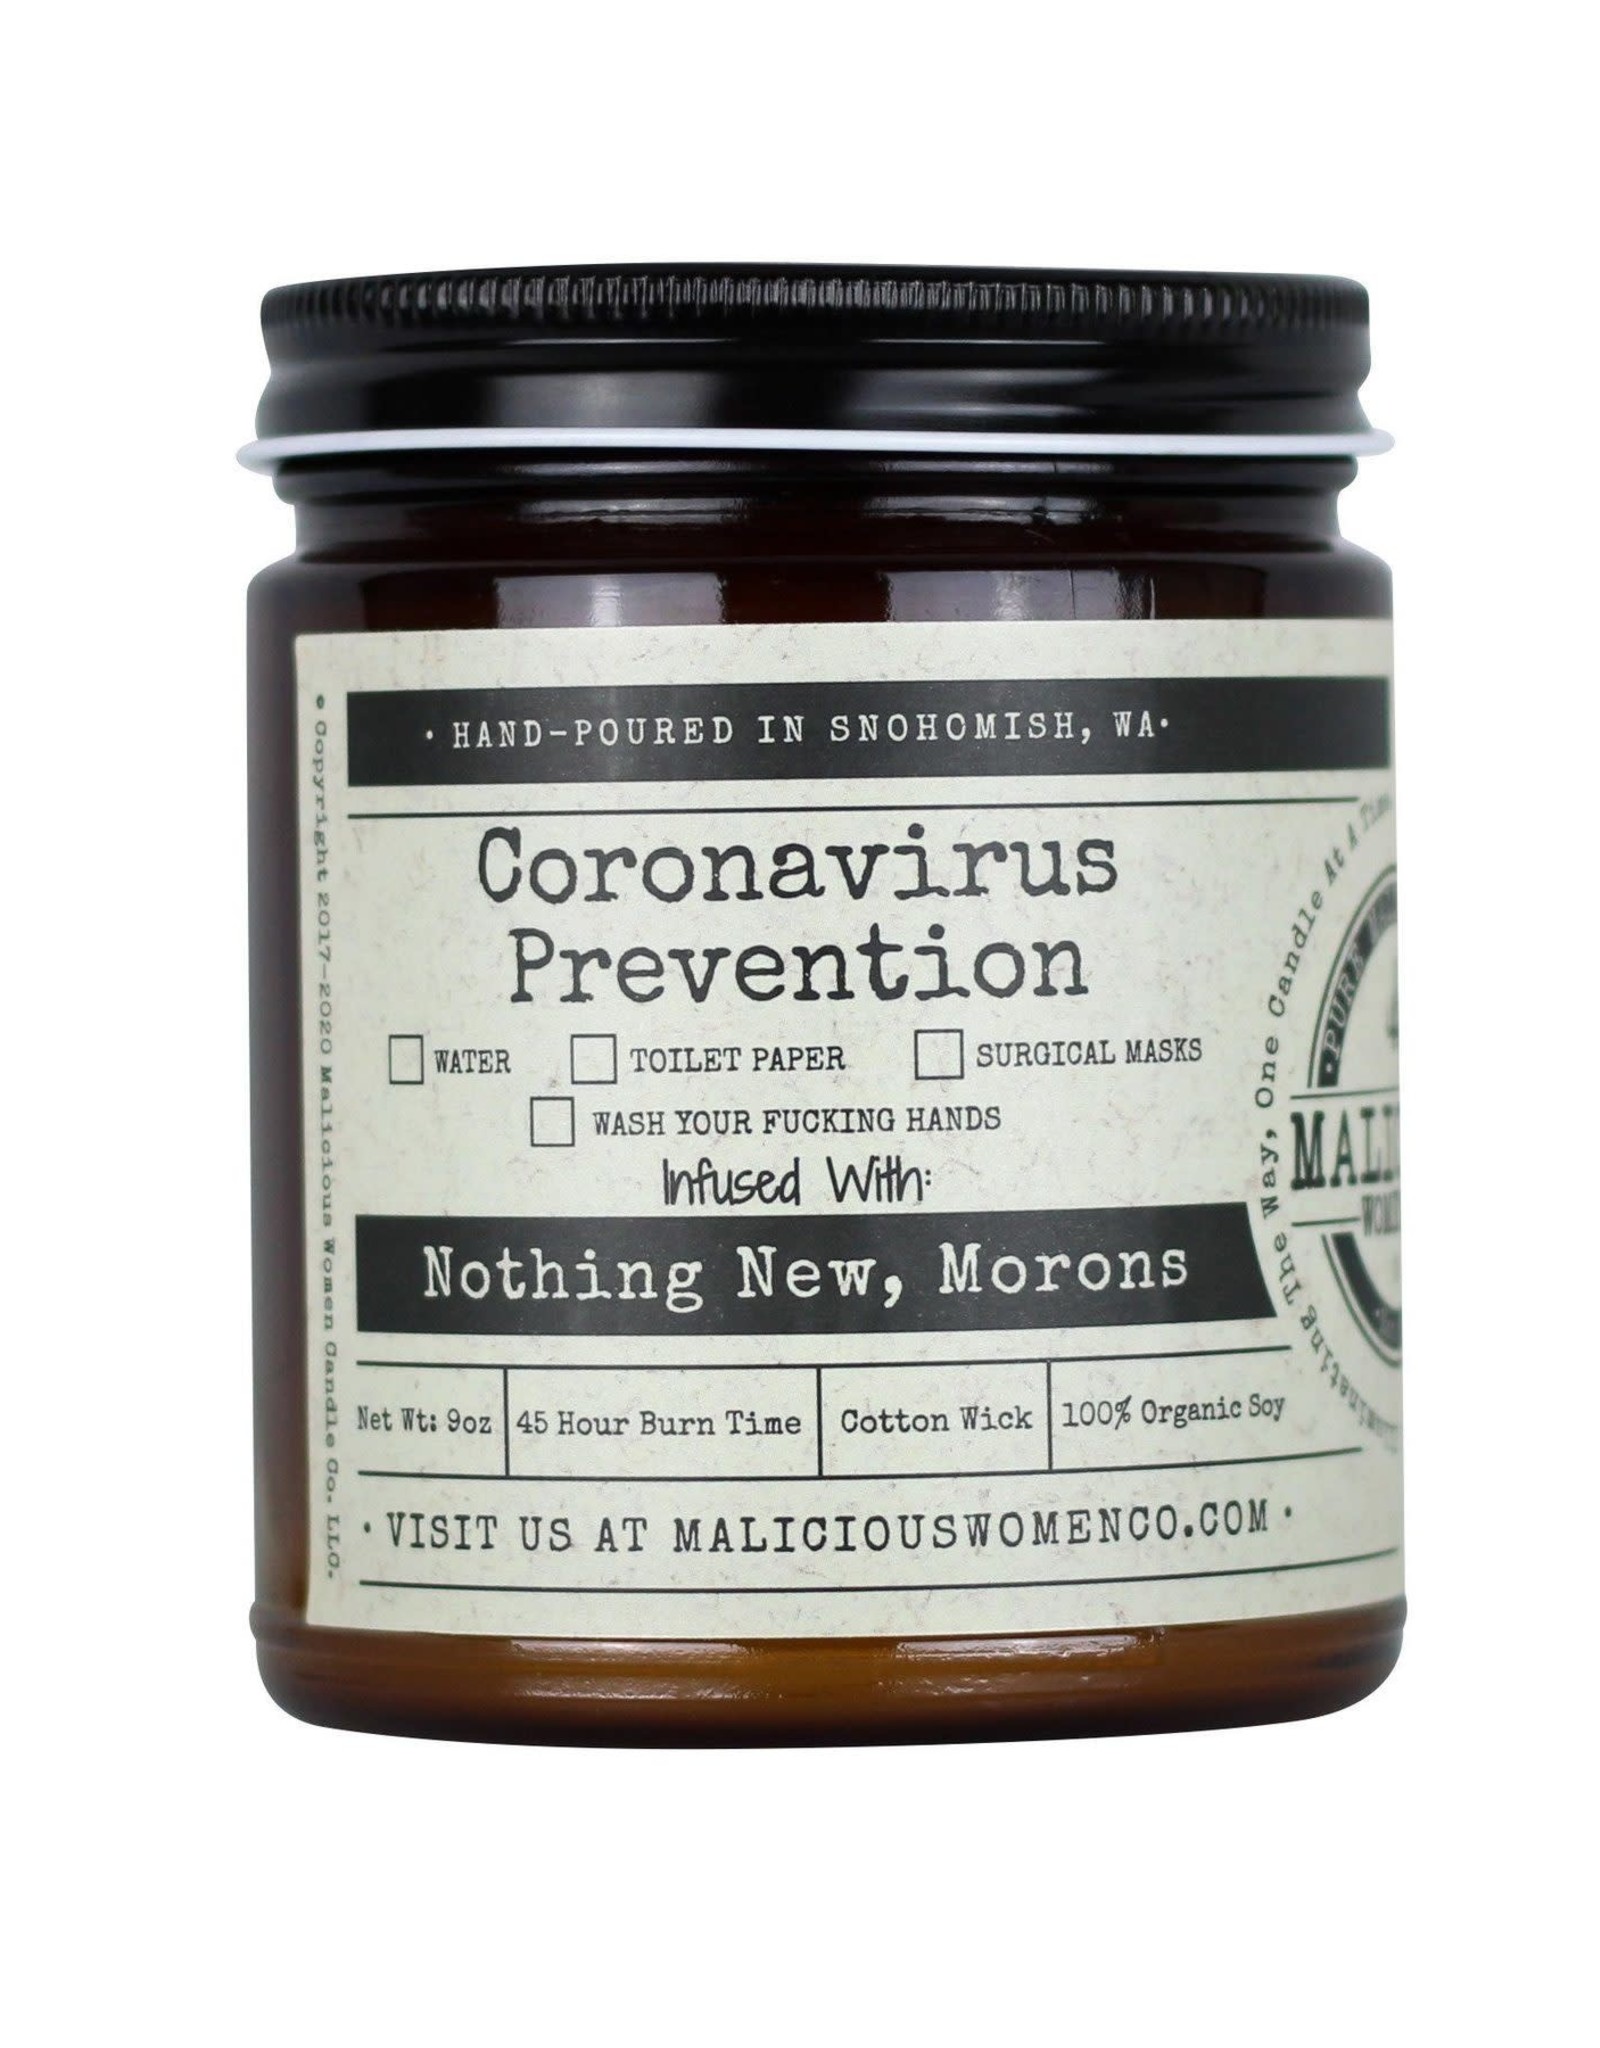 Coronavirus Prevention Checklist Candle Infused With: Nothing New, Morons Scent: Pear & Ivy